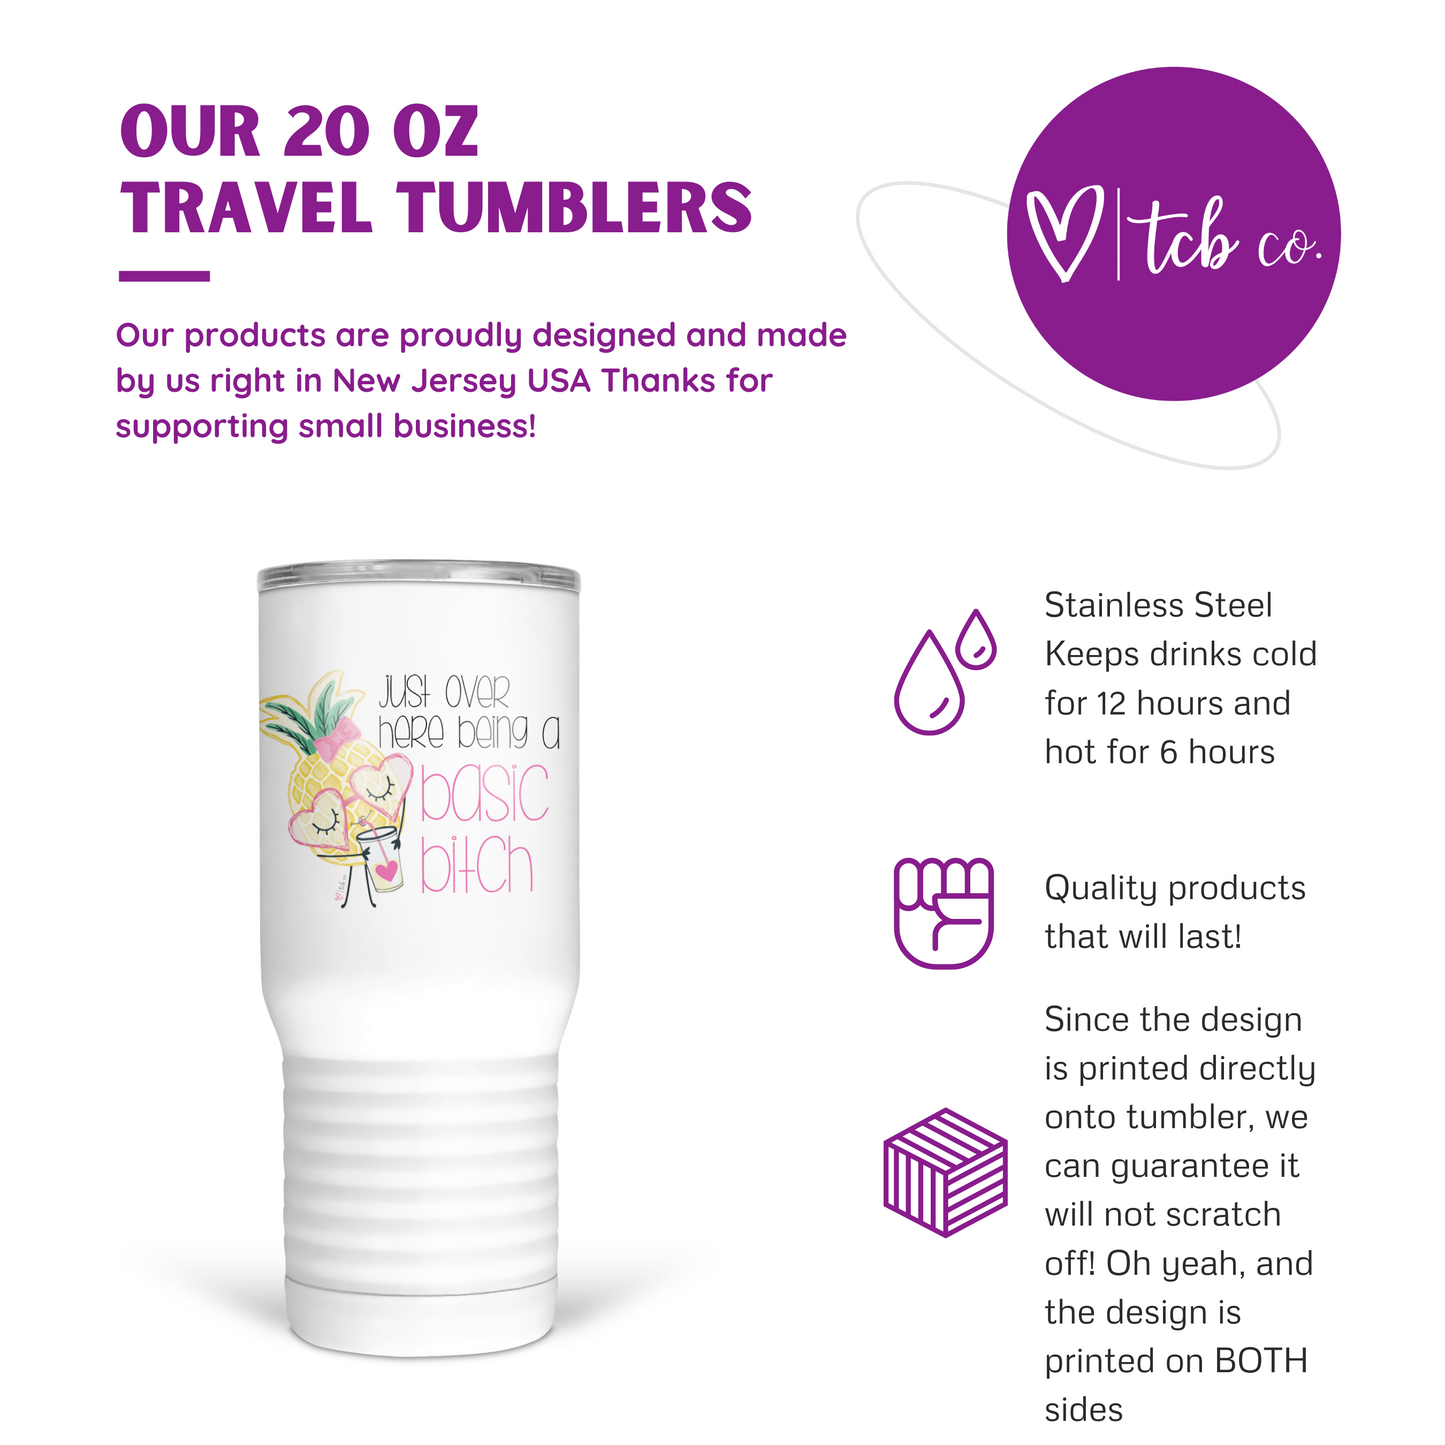 Just Over Here Being A Basic Bitch 20 Oz Travel Tumbler